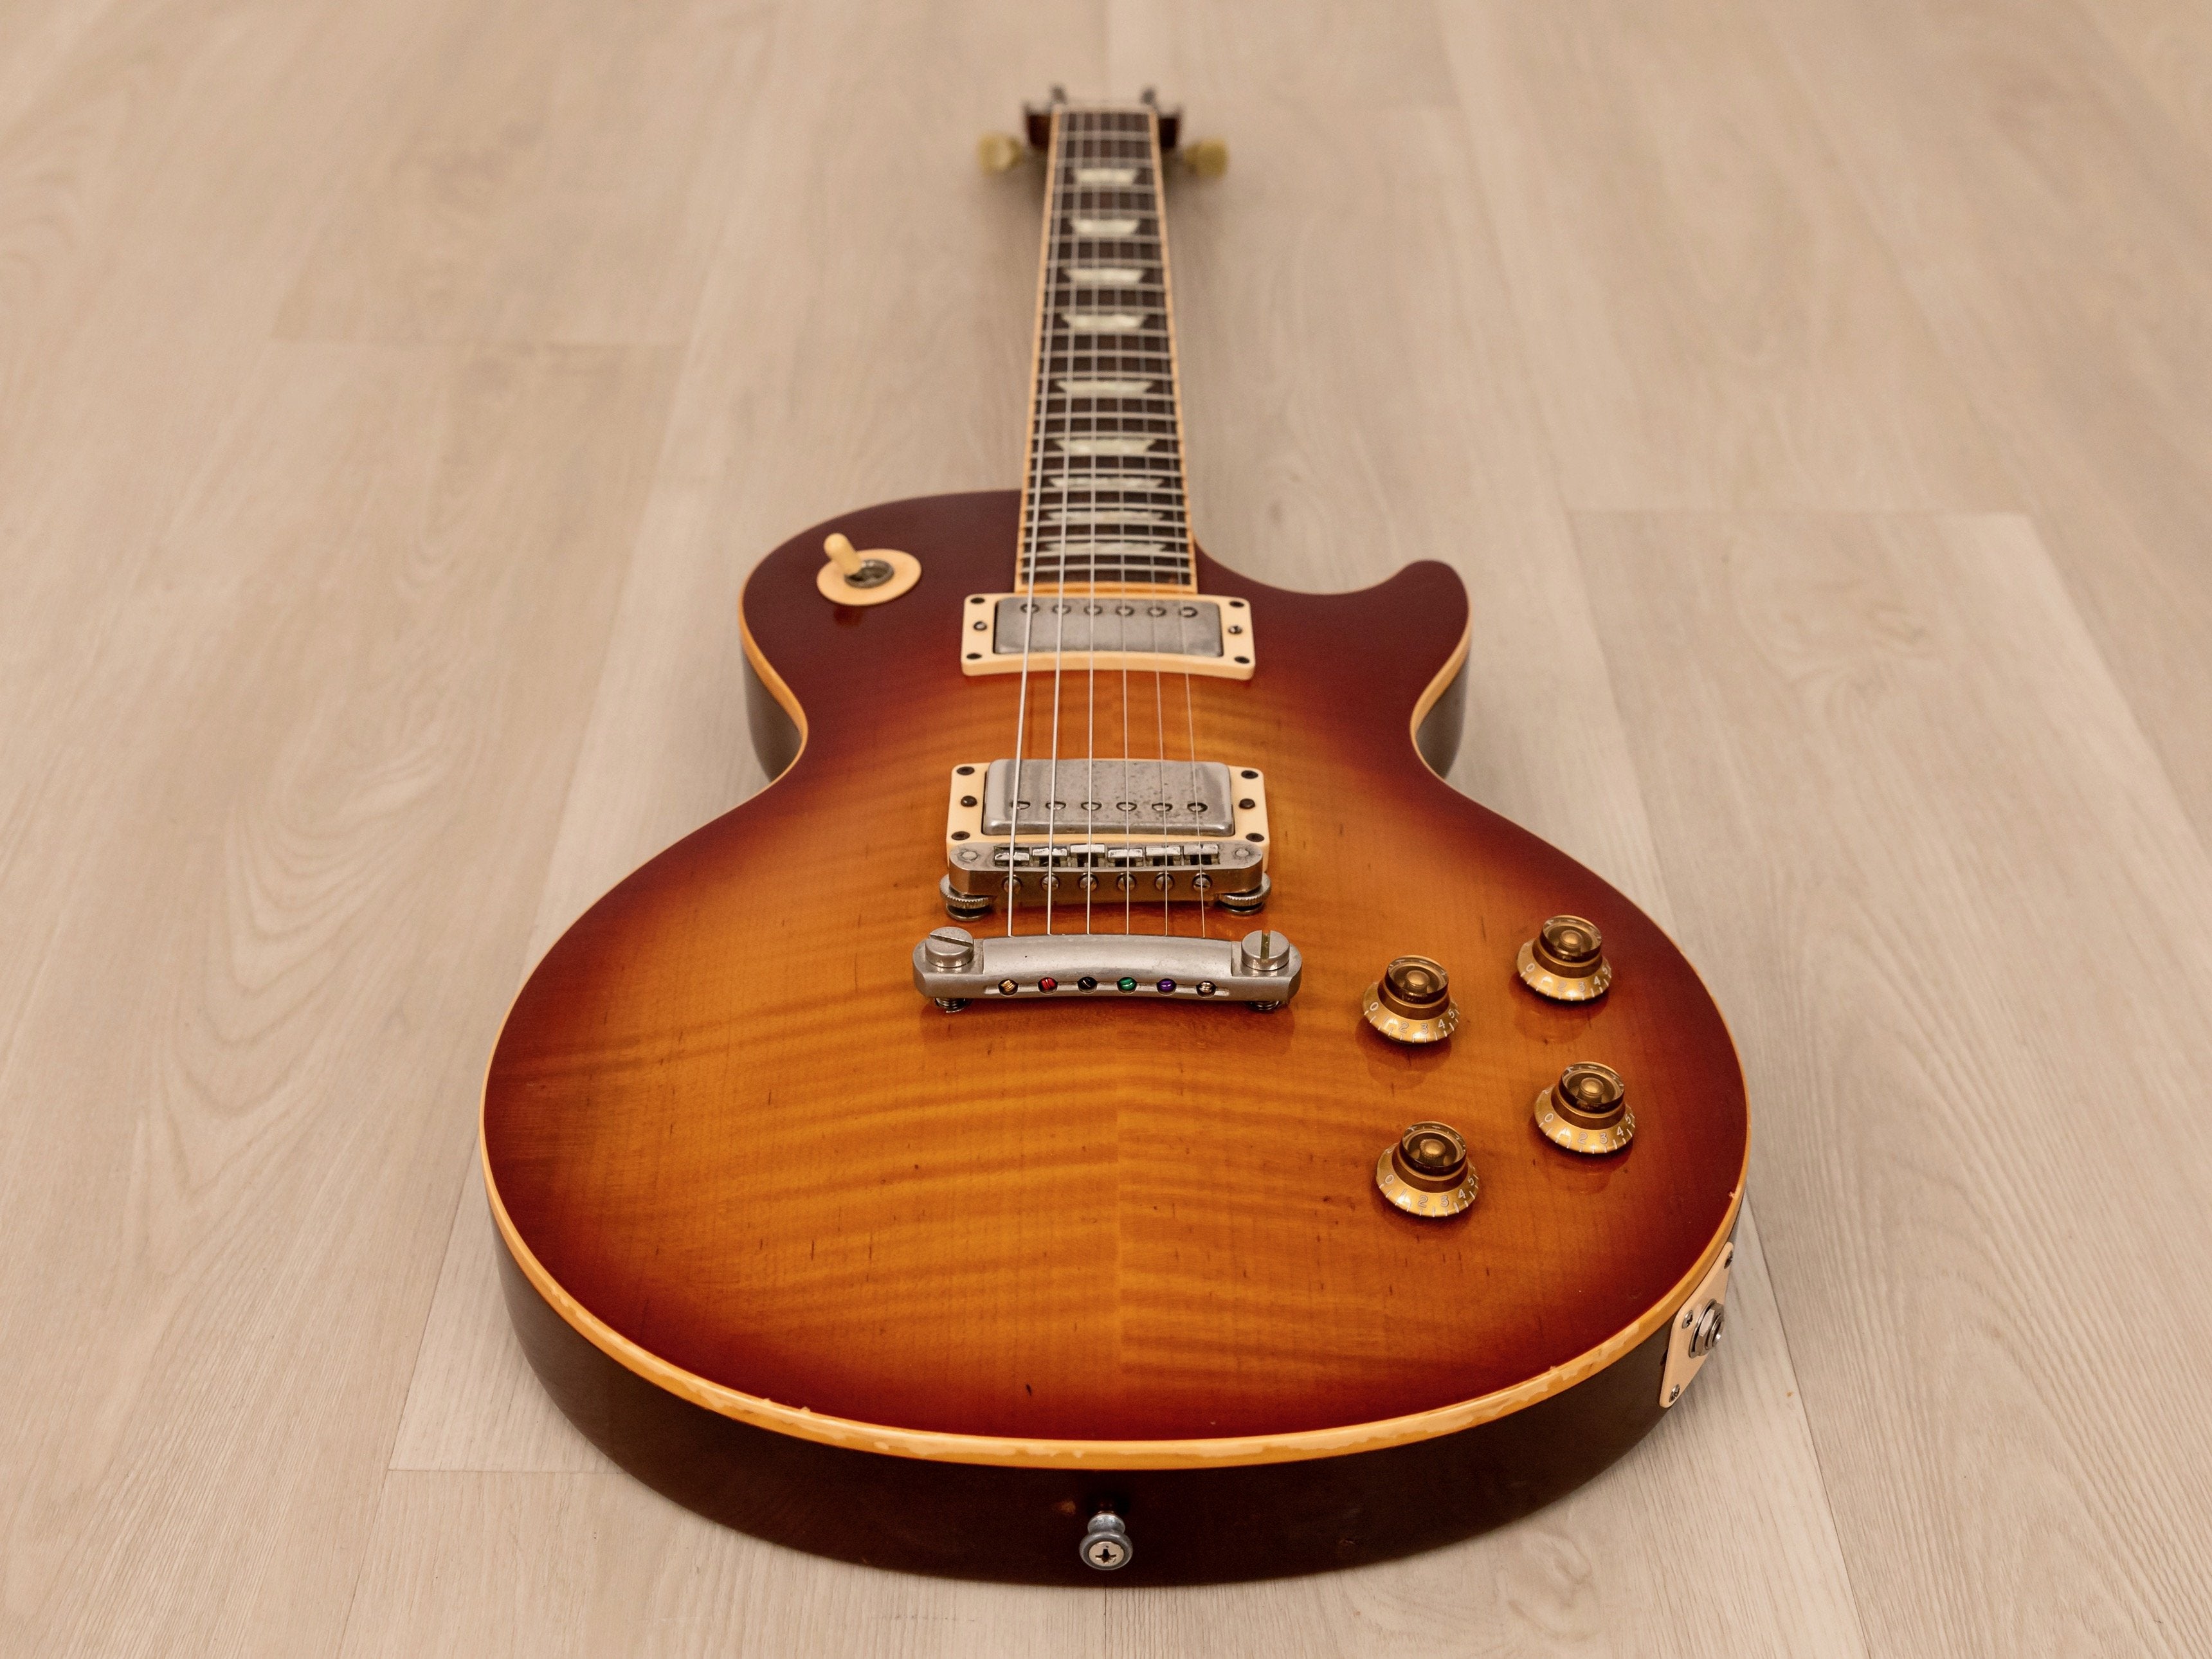 2002 Gibson Les Paul Standard Plus AAA Flame Top Cherry Sunburst w/ 57 Classic PAFs, Case